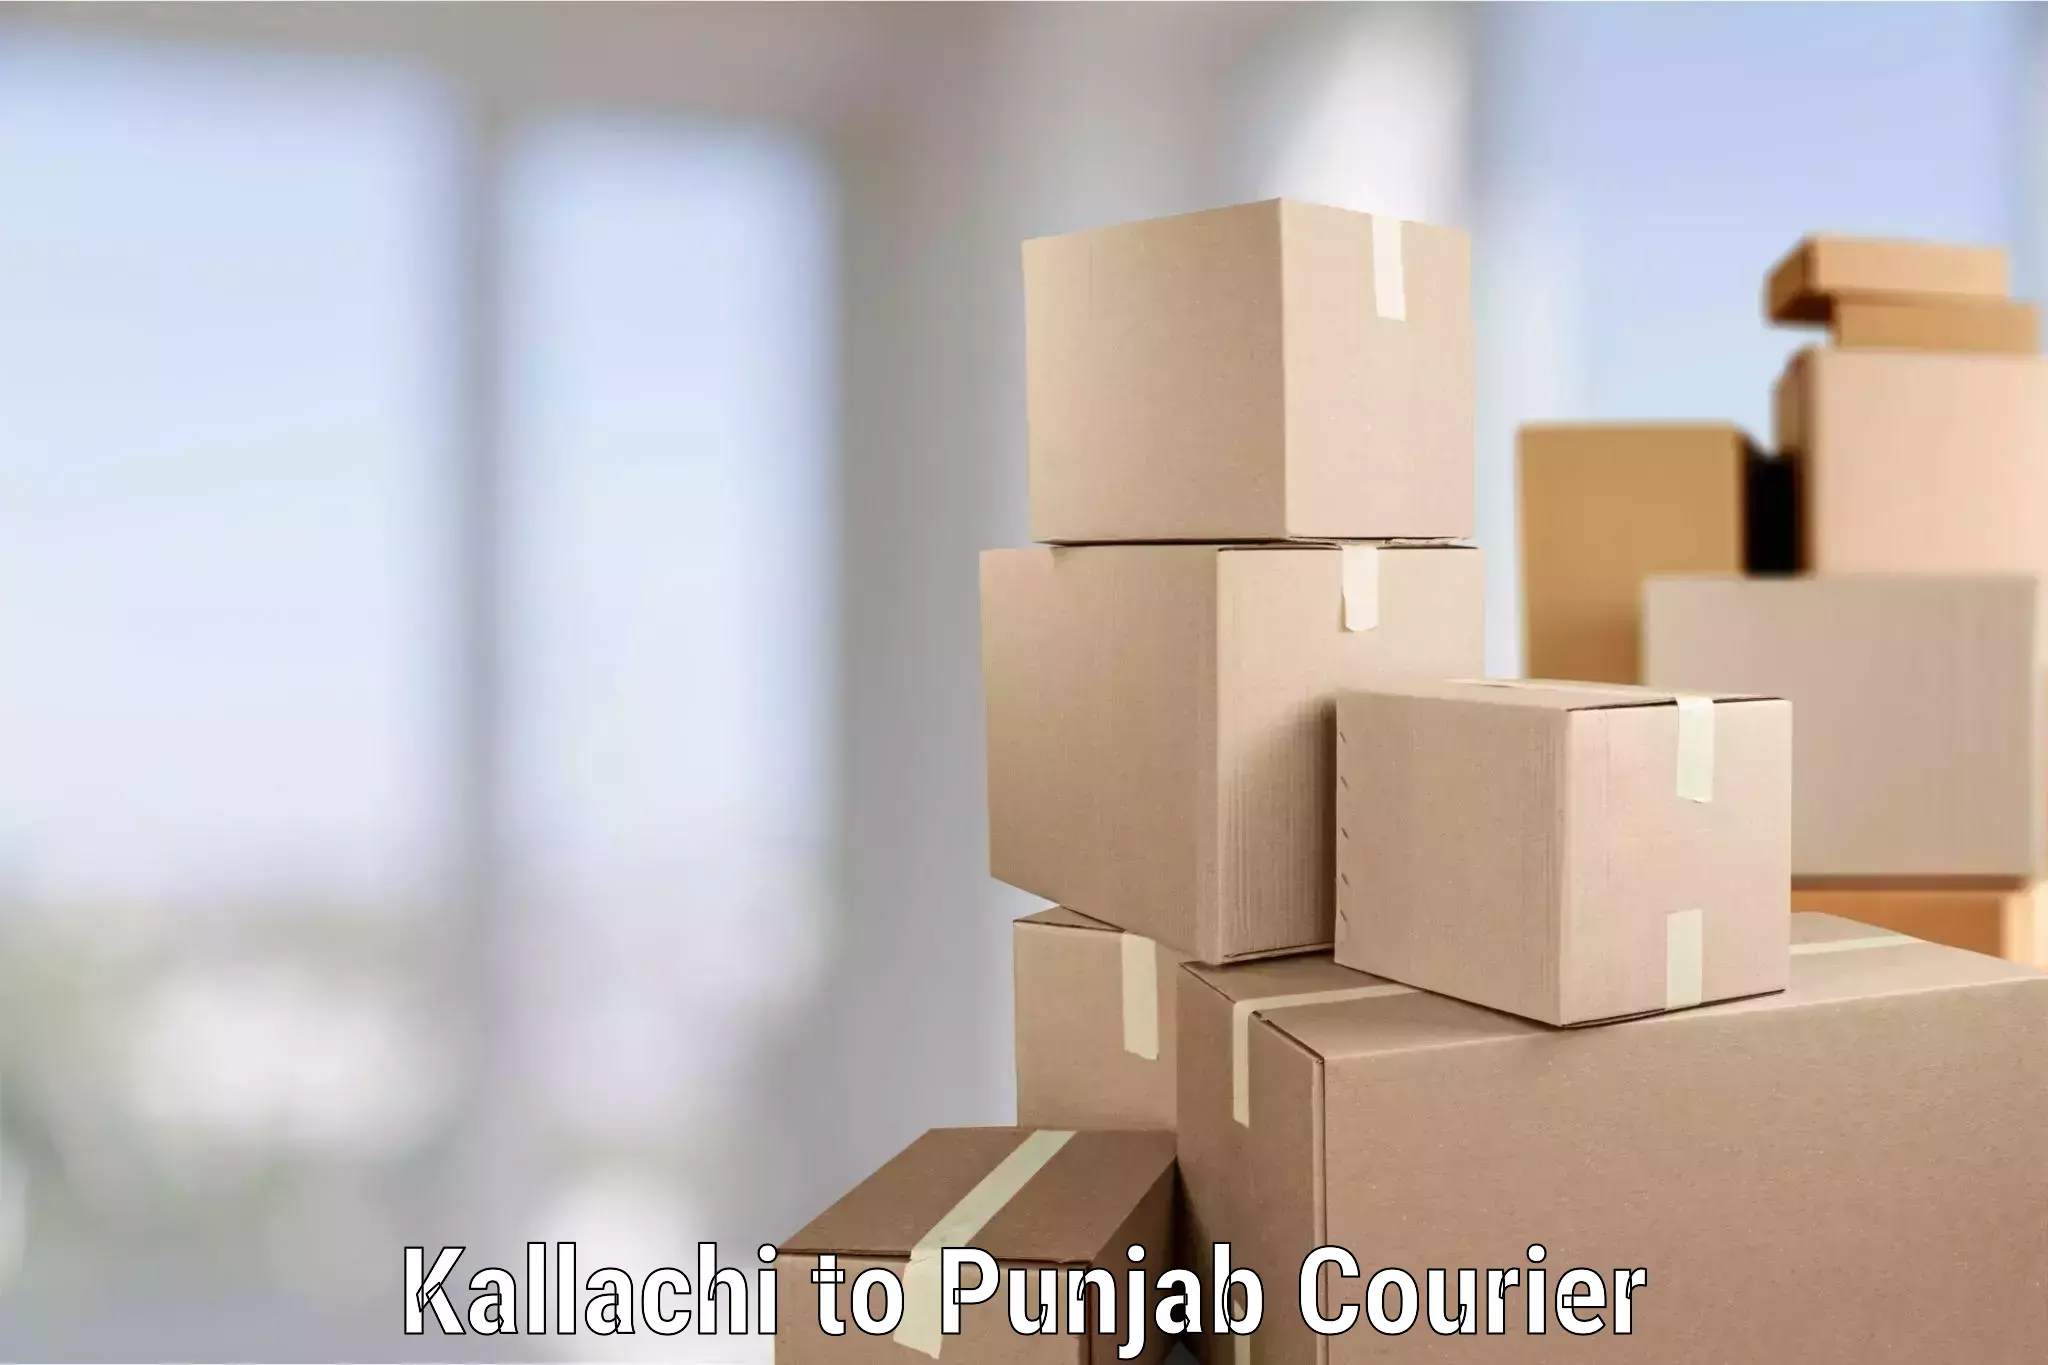 Cost-effective moving options Kallachi to Punjab